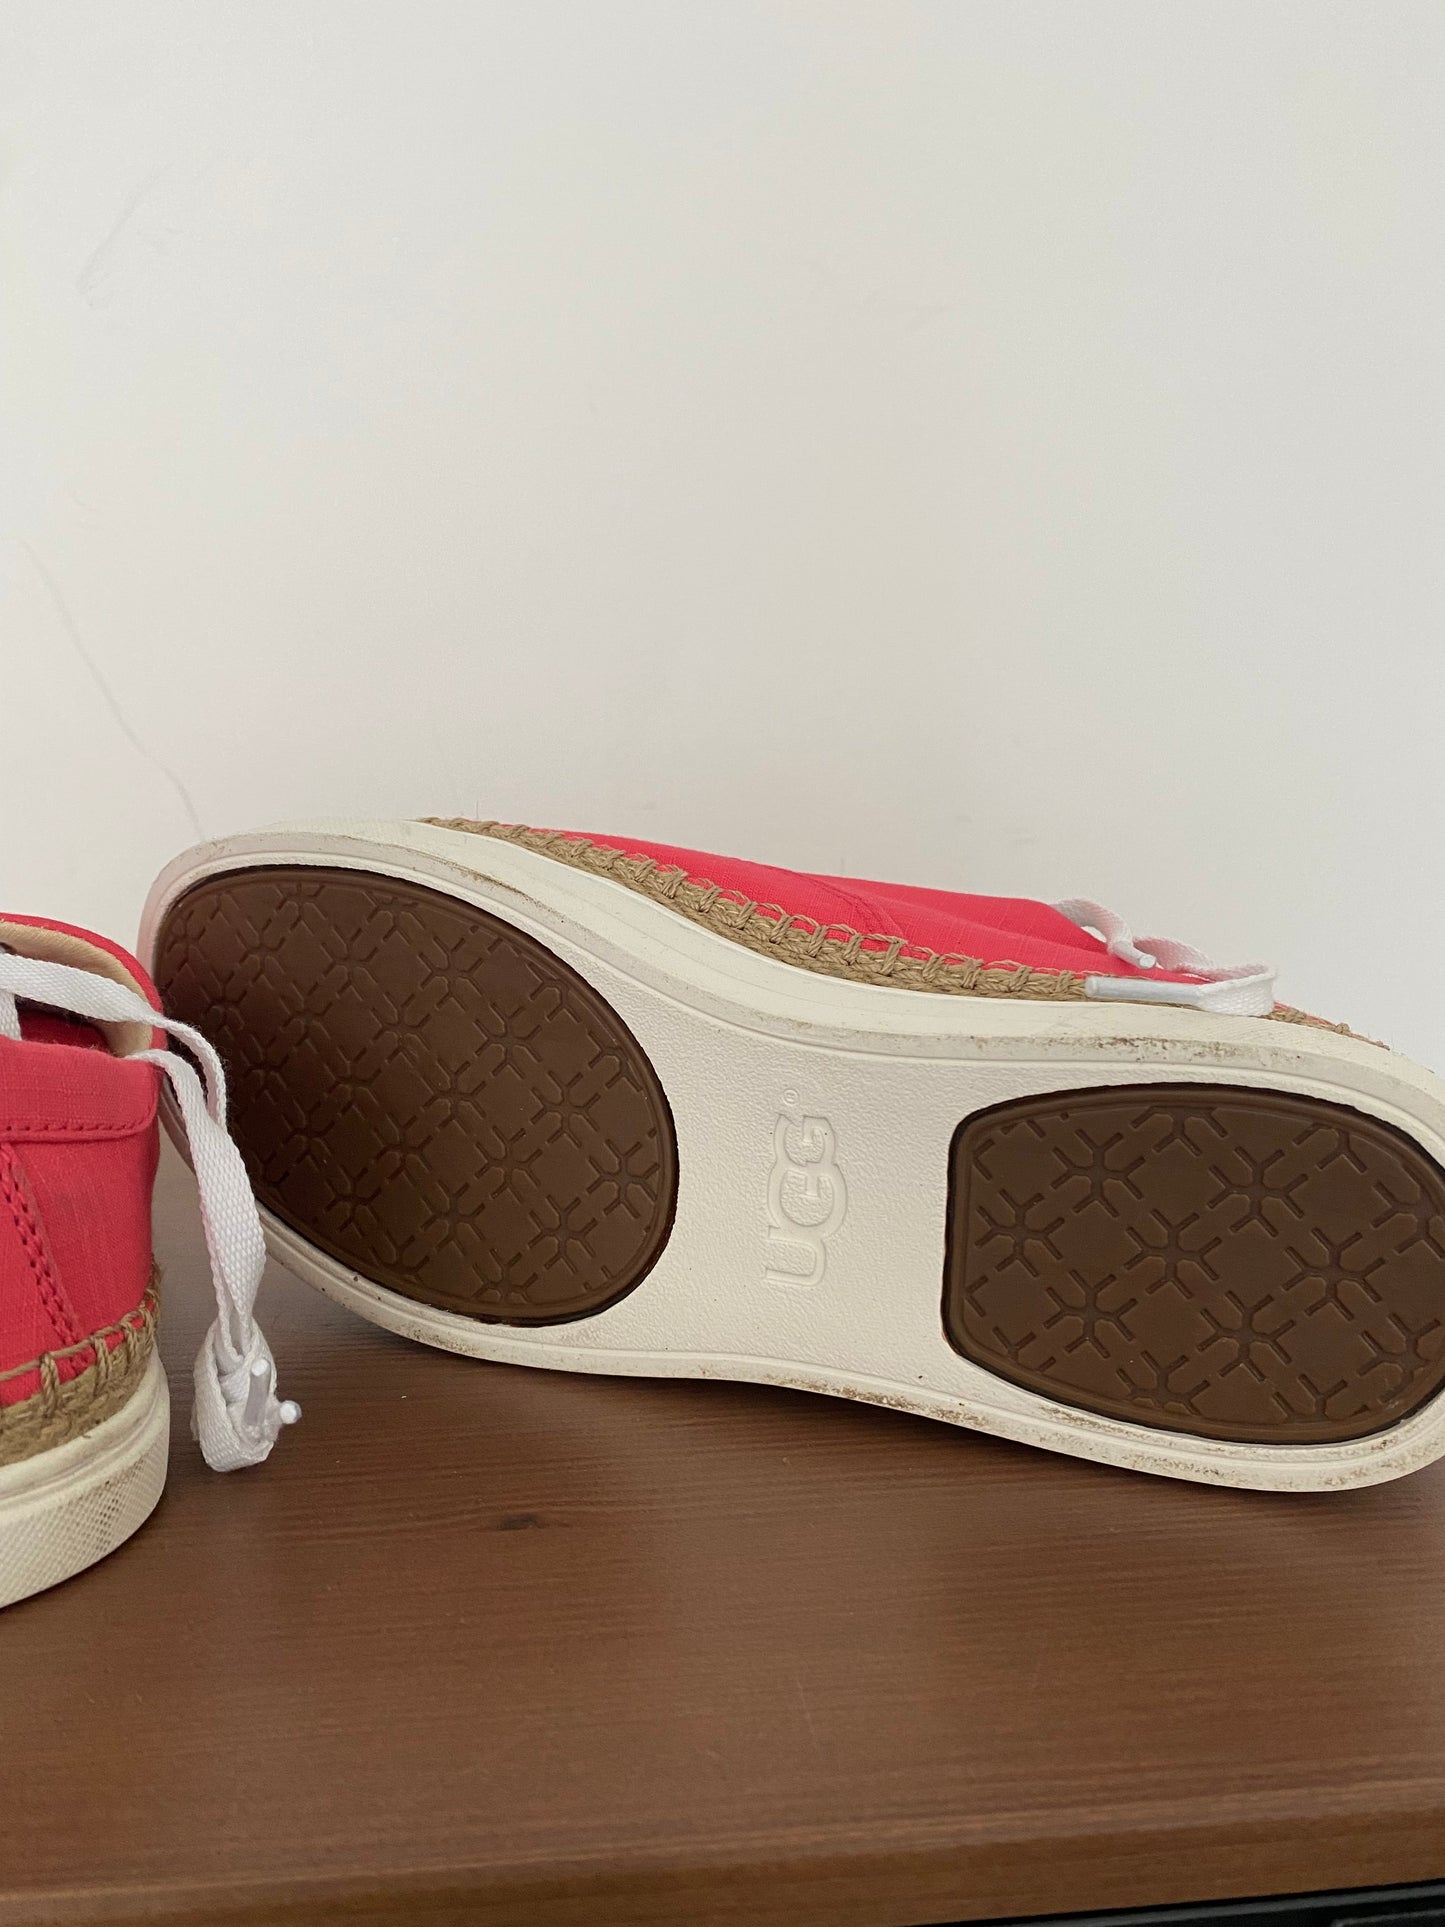 UGG Red Espadrille Canvas Shoes Size 7.5